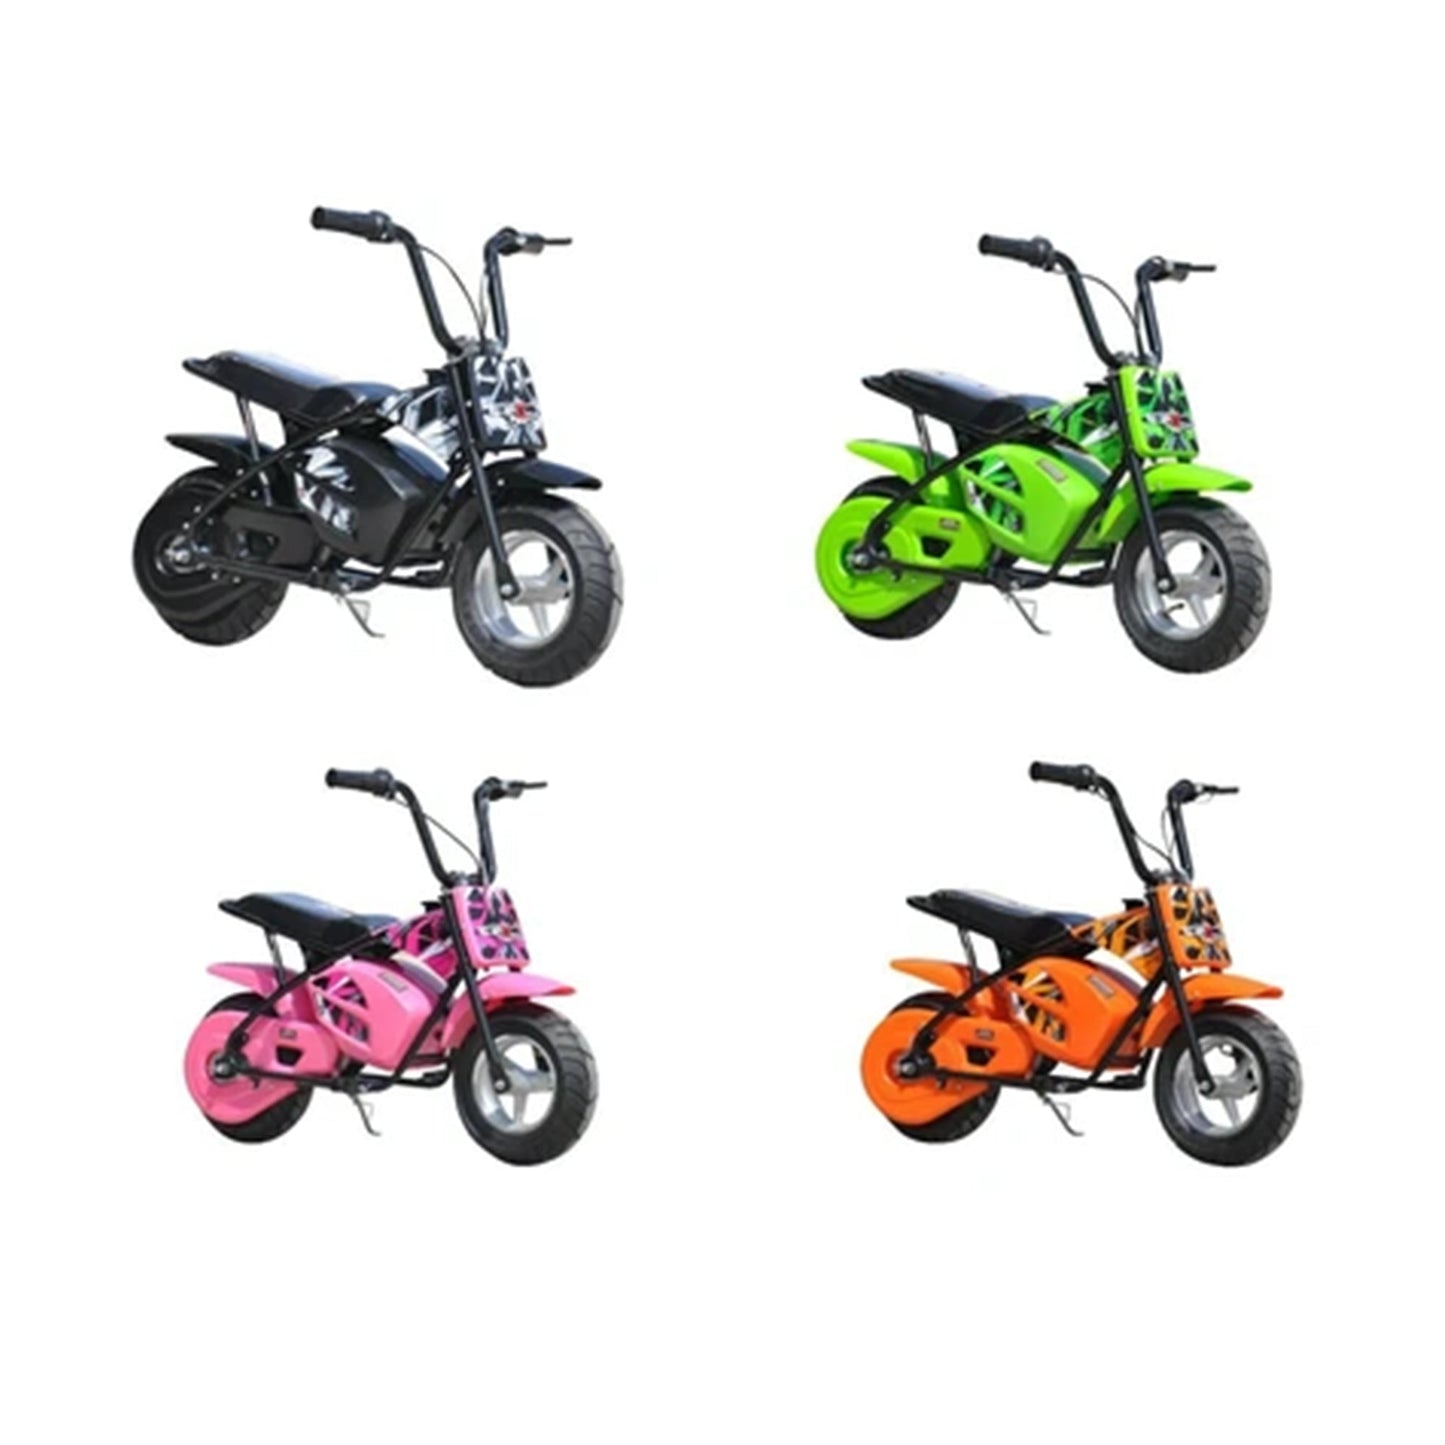 "Collection of colorful mini Dirtbike Scrambler electric scooters for kids on a white background."